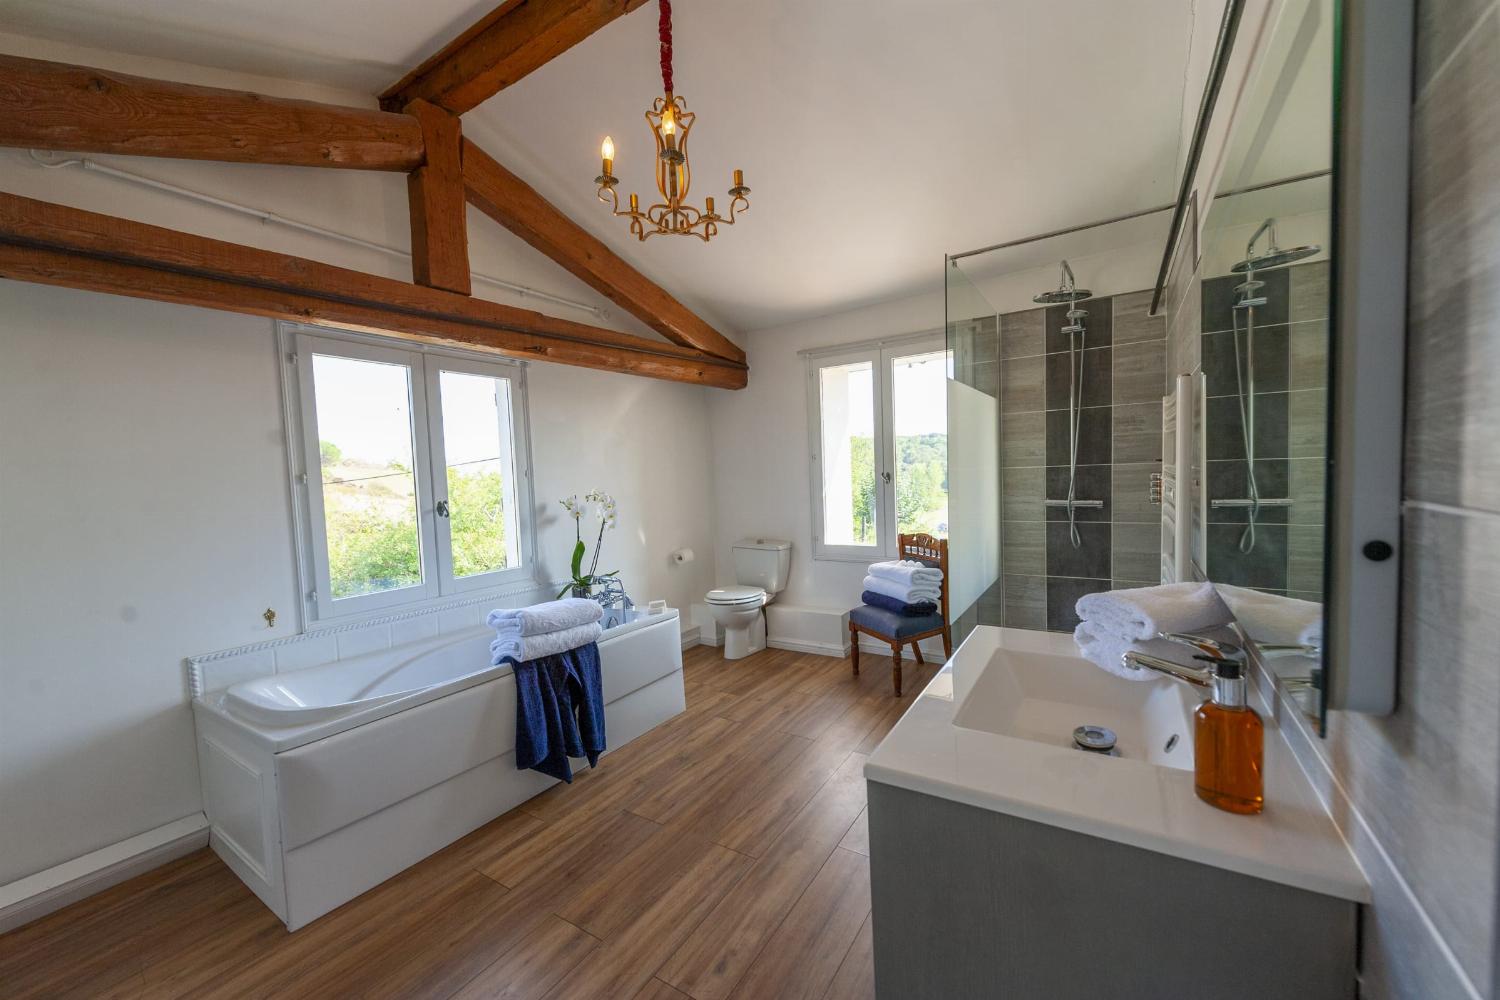 Bathroom | Holiday home in the South of France